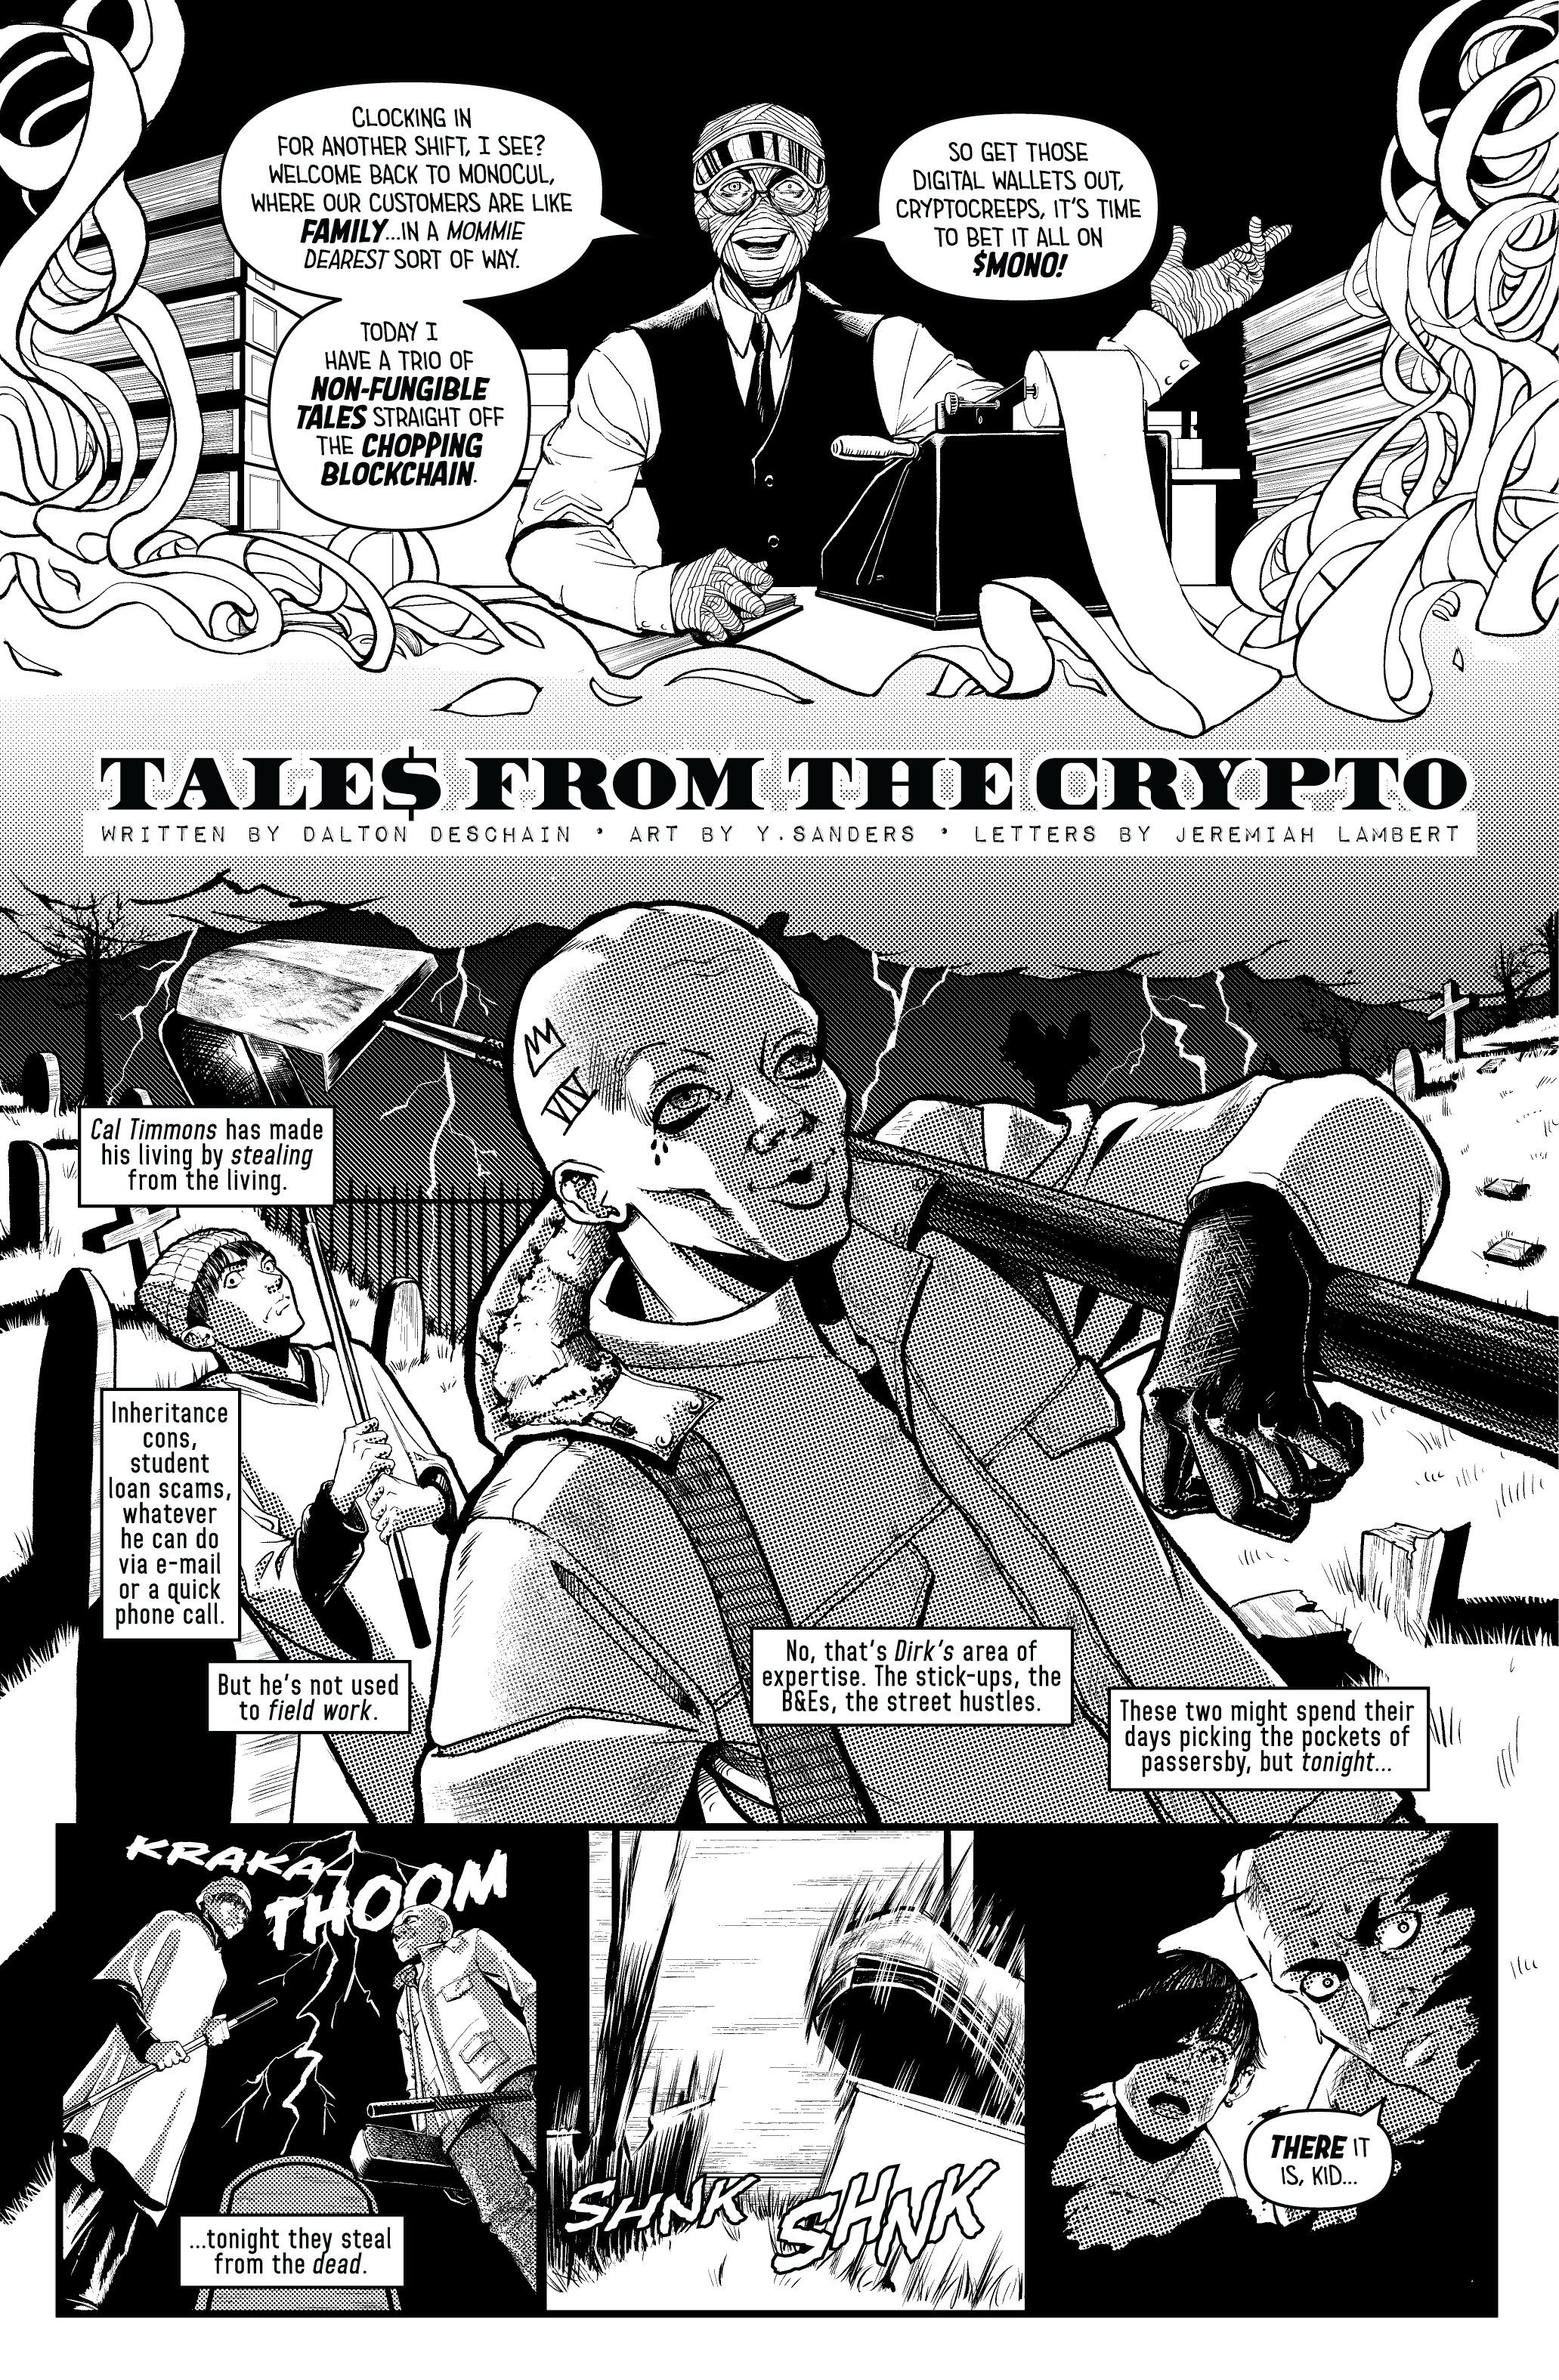 Monocul issue 07 story 01 pg 01 - Tales From The Crypto-01.png